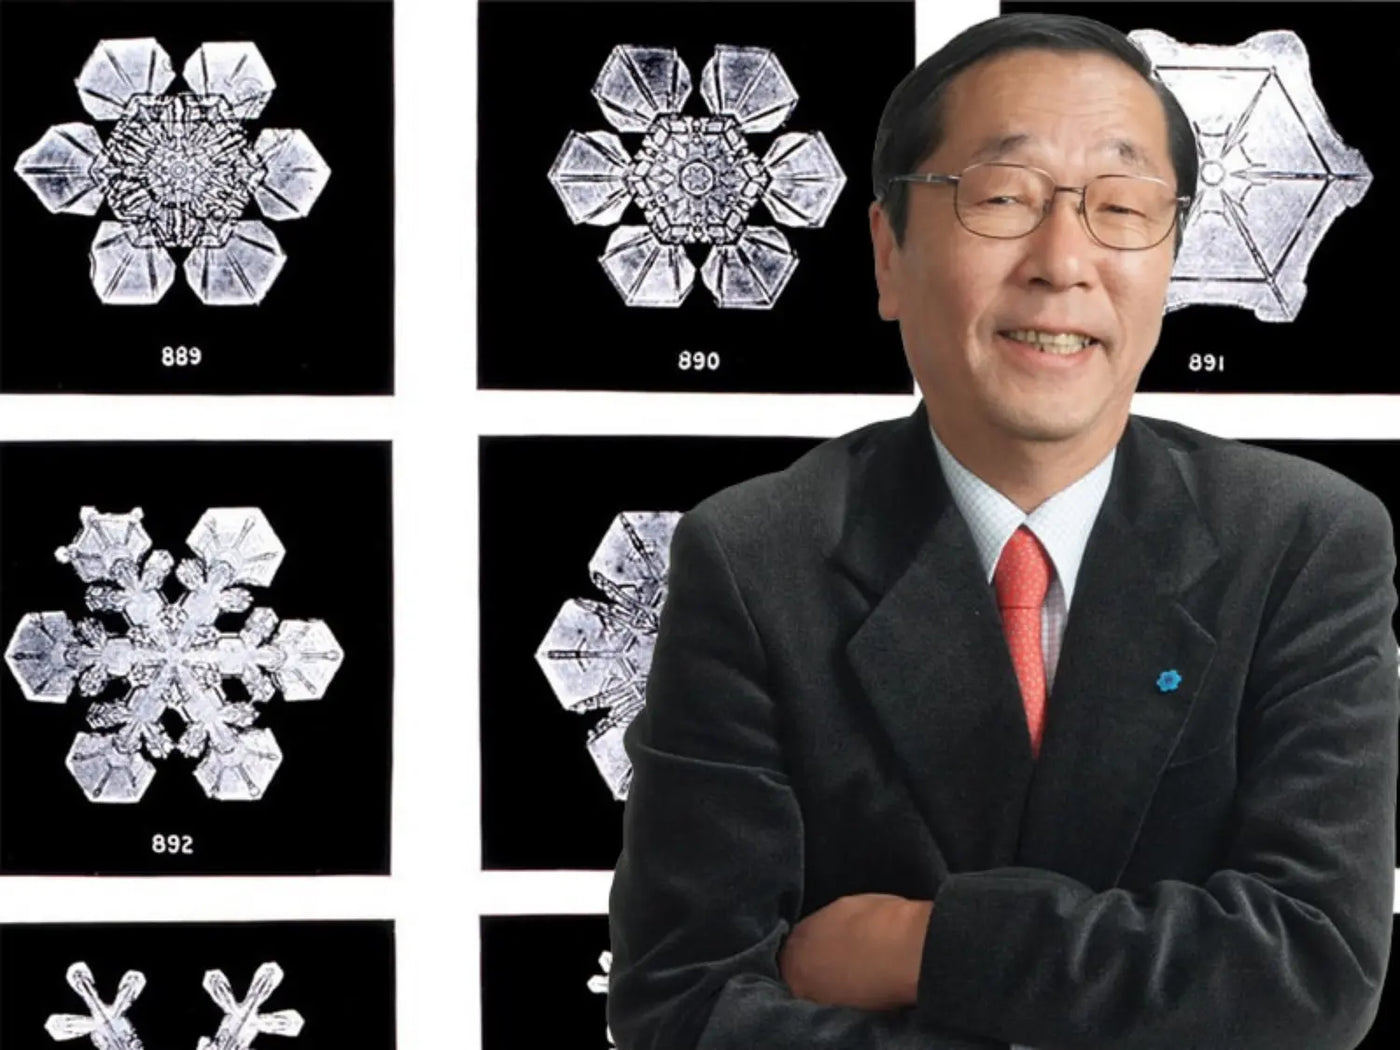 Dr. Emoto's Visionary Research: Can the Flower of Life Truly Transform Water's Structure?